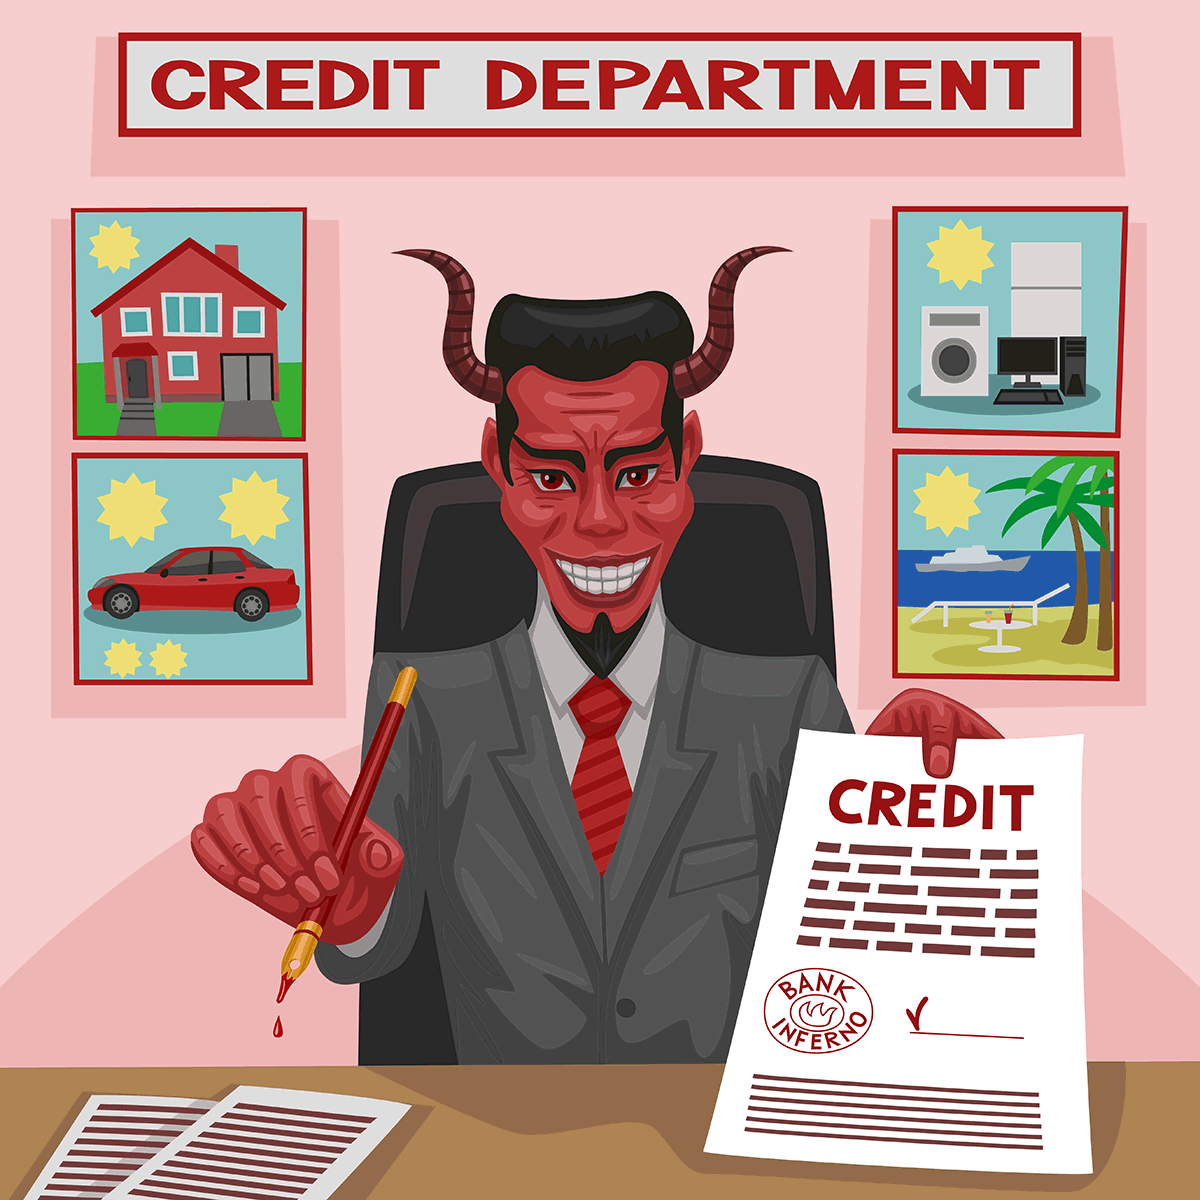 Credit is the Devil.